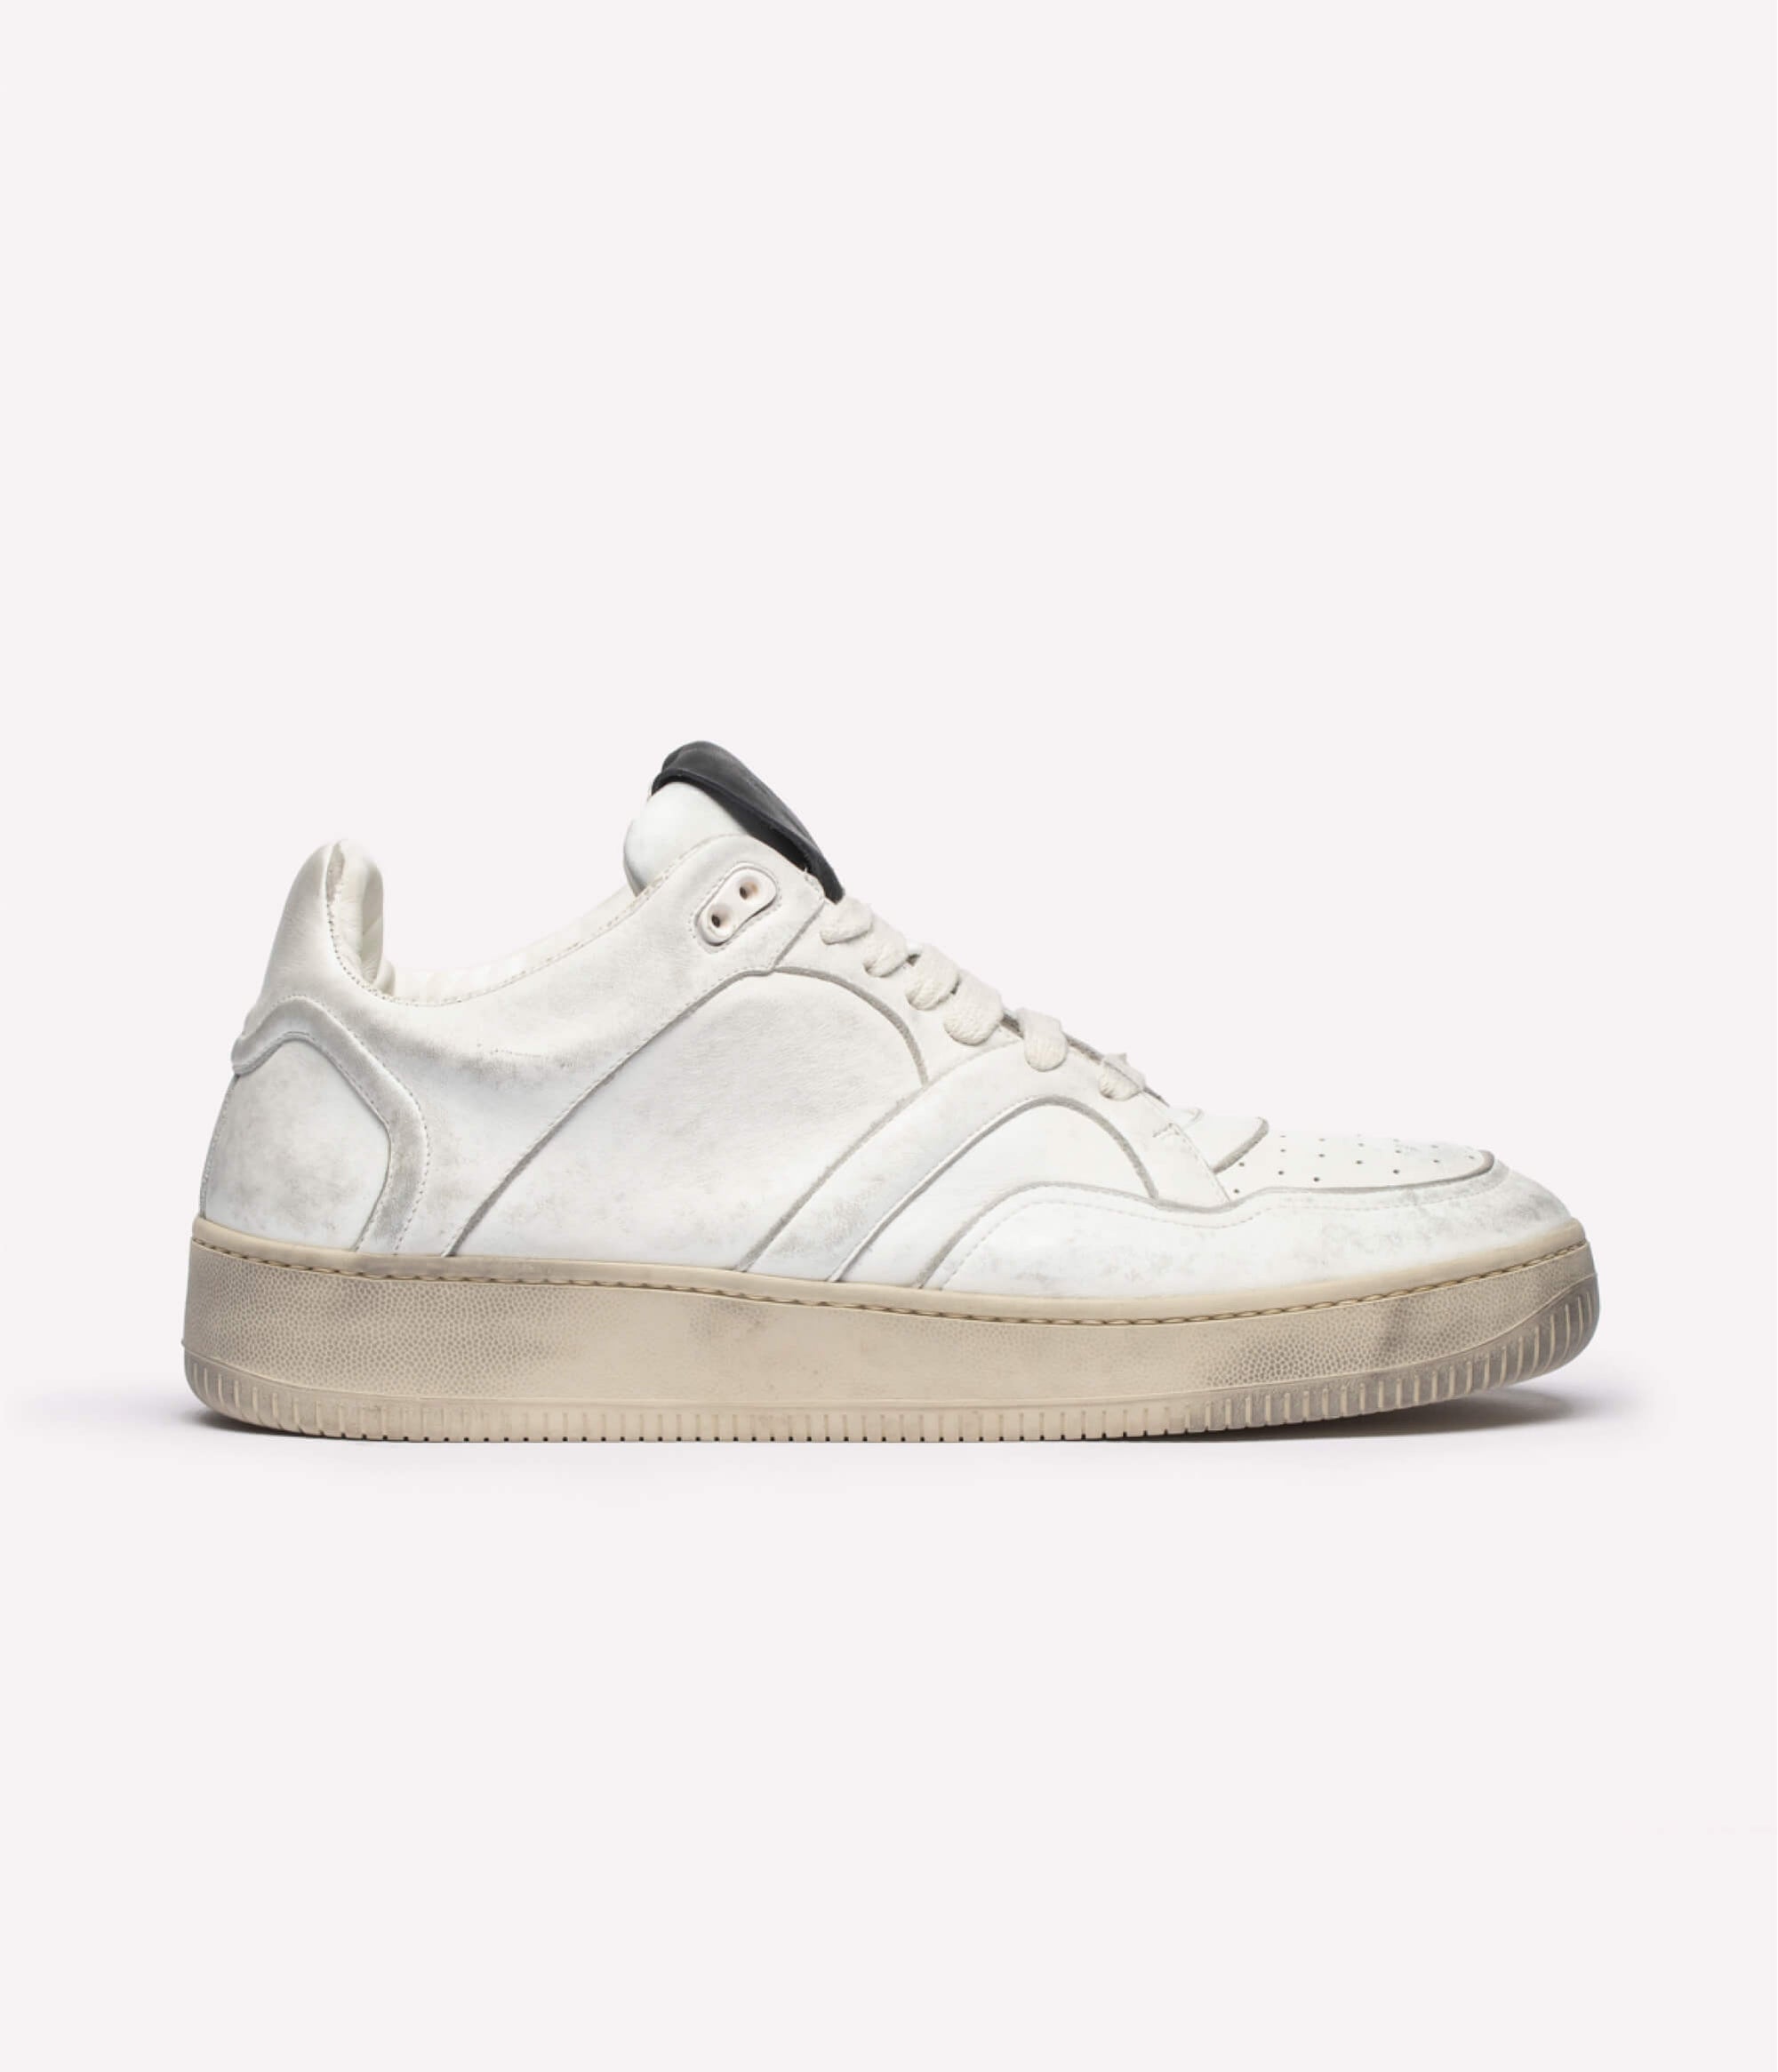 HUMAN RECREATIONAL SERVICES MONGOOSE LOW SHOE IN DISTRESSED WHITE MADE WITH ITALIAN CALF SKIN